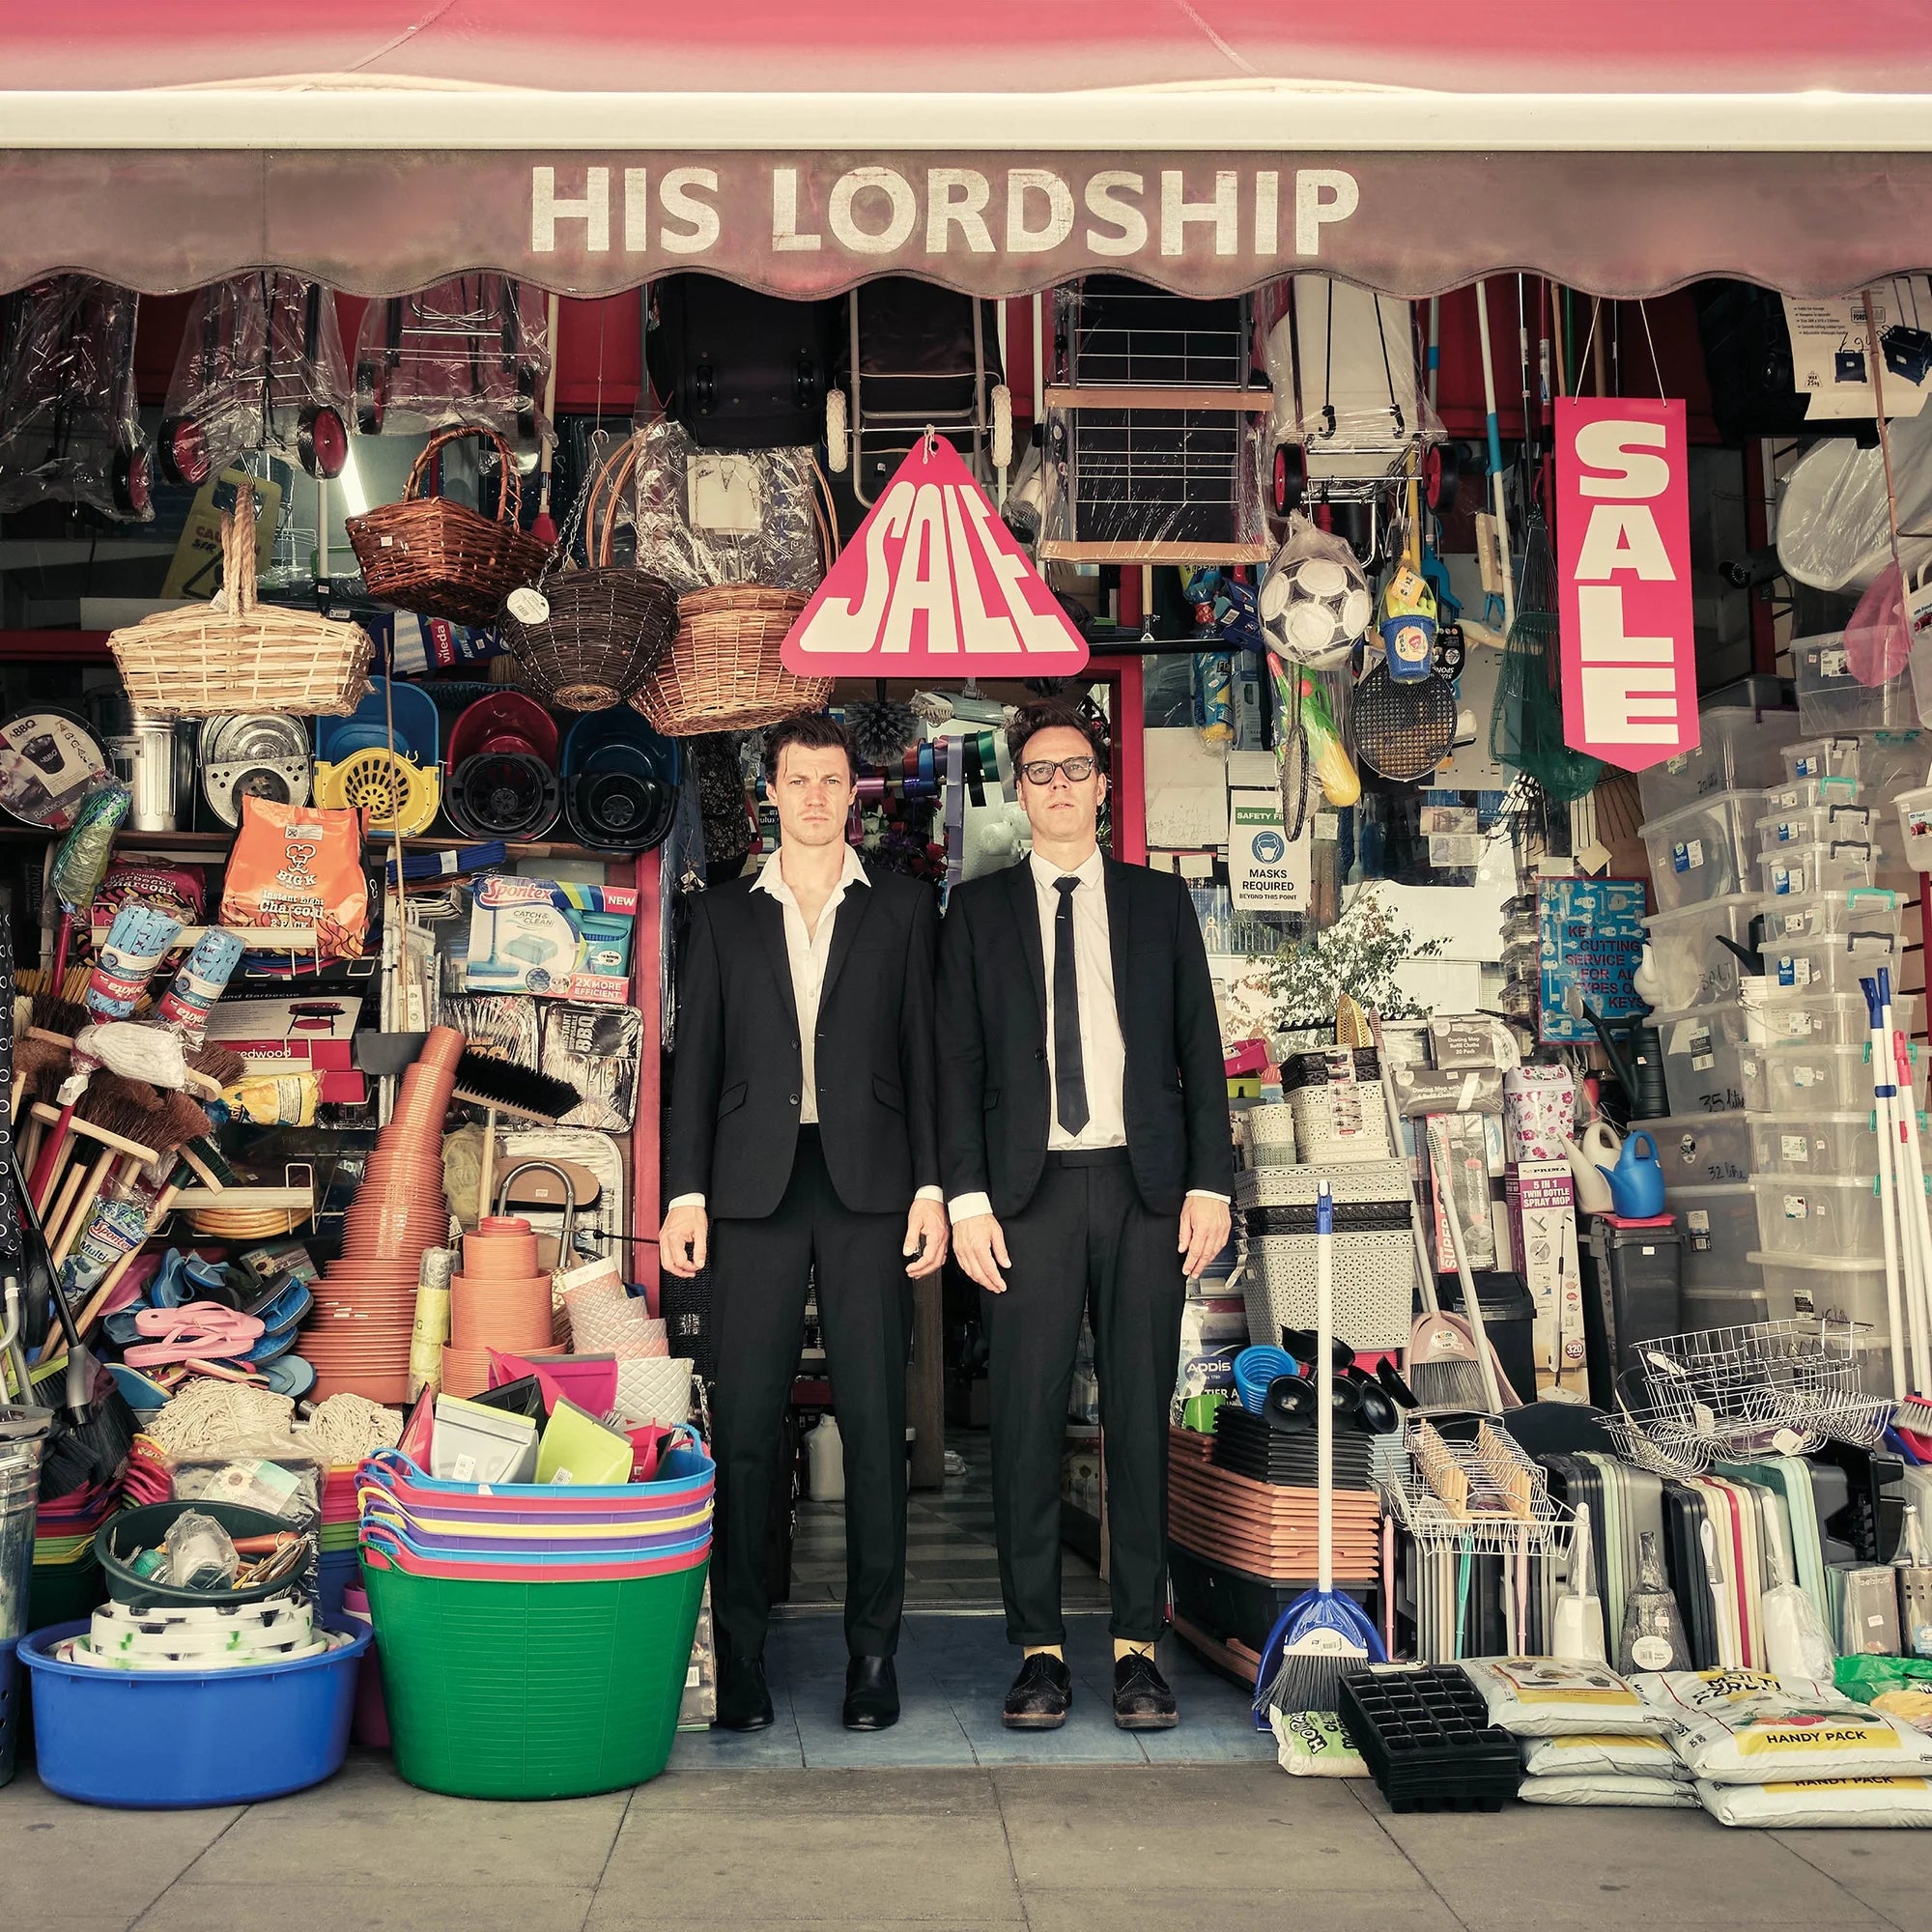 His Lordship - His Lordship: Limited Clear Vinyl LP